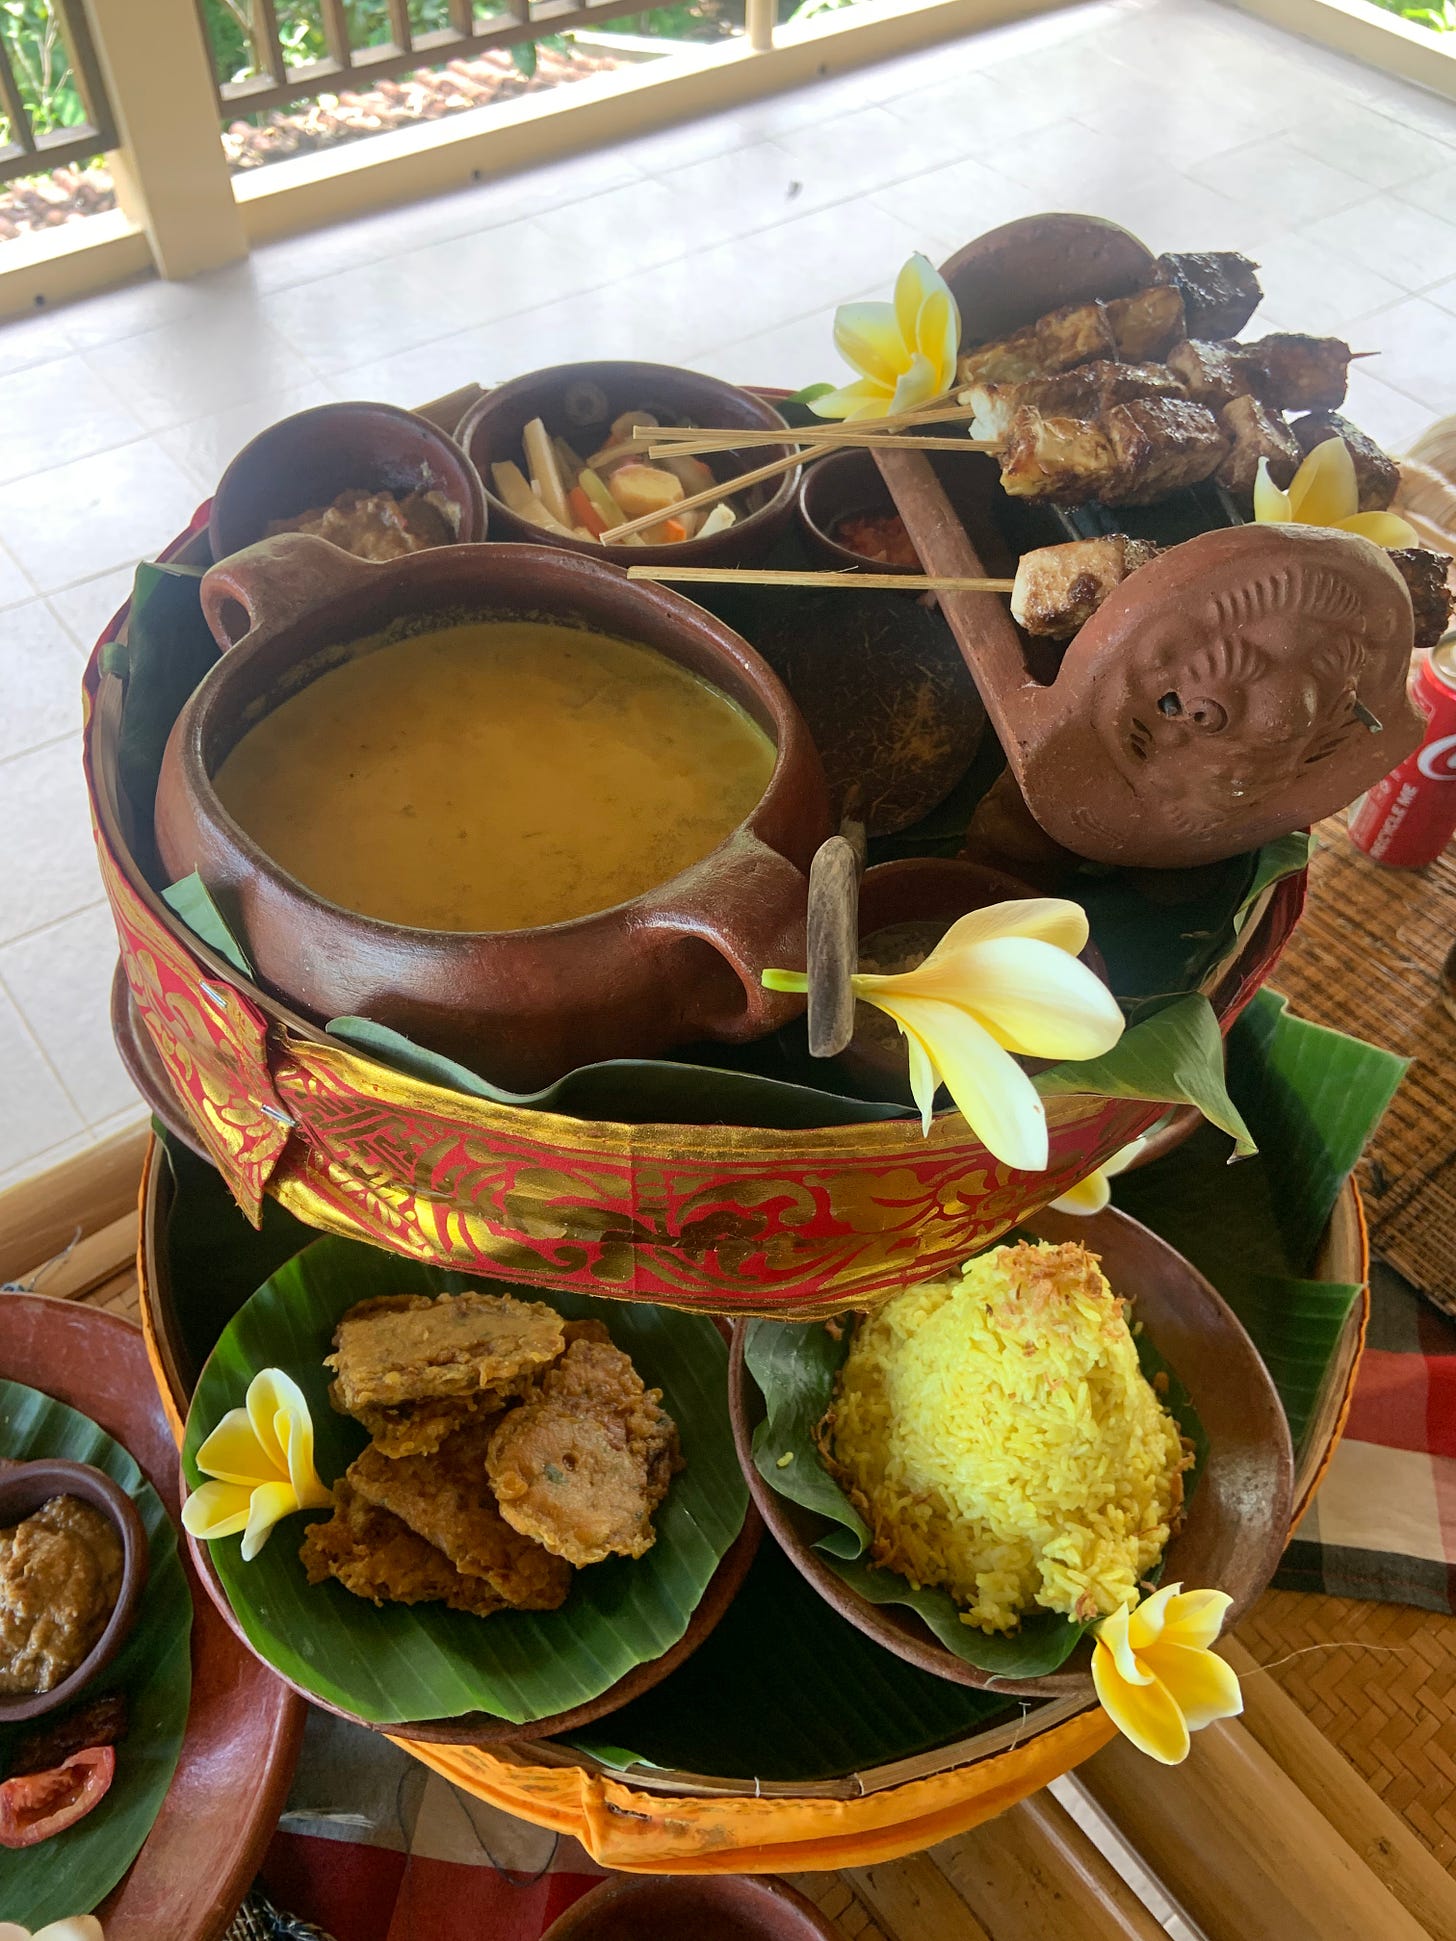 Coconut curry, satay tofu/tempe, yellow rice served in brown ceramic bowls